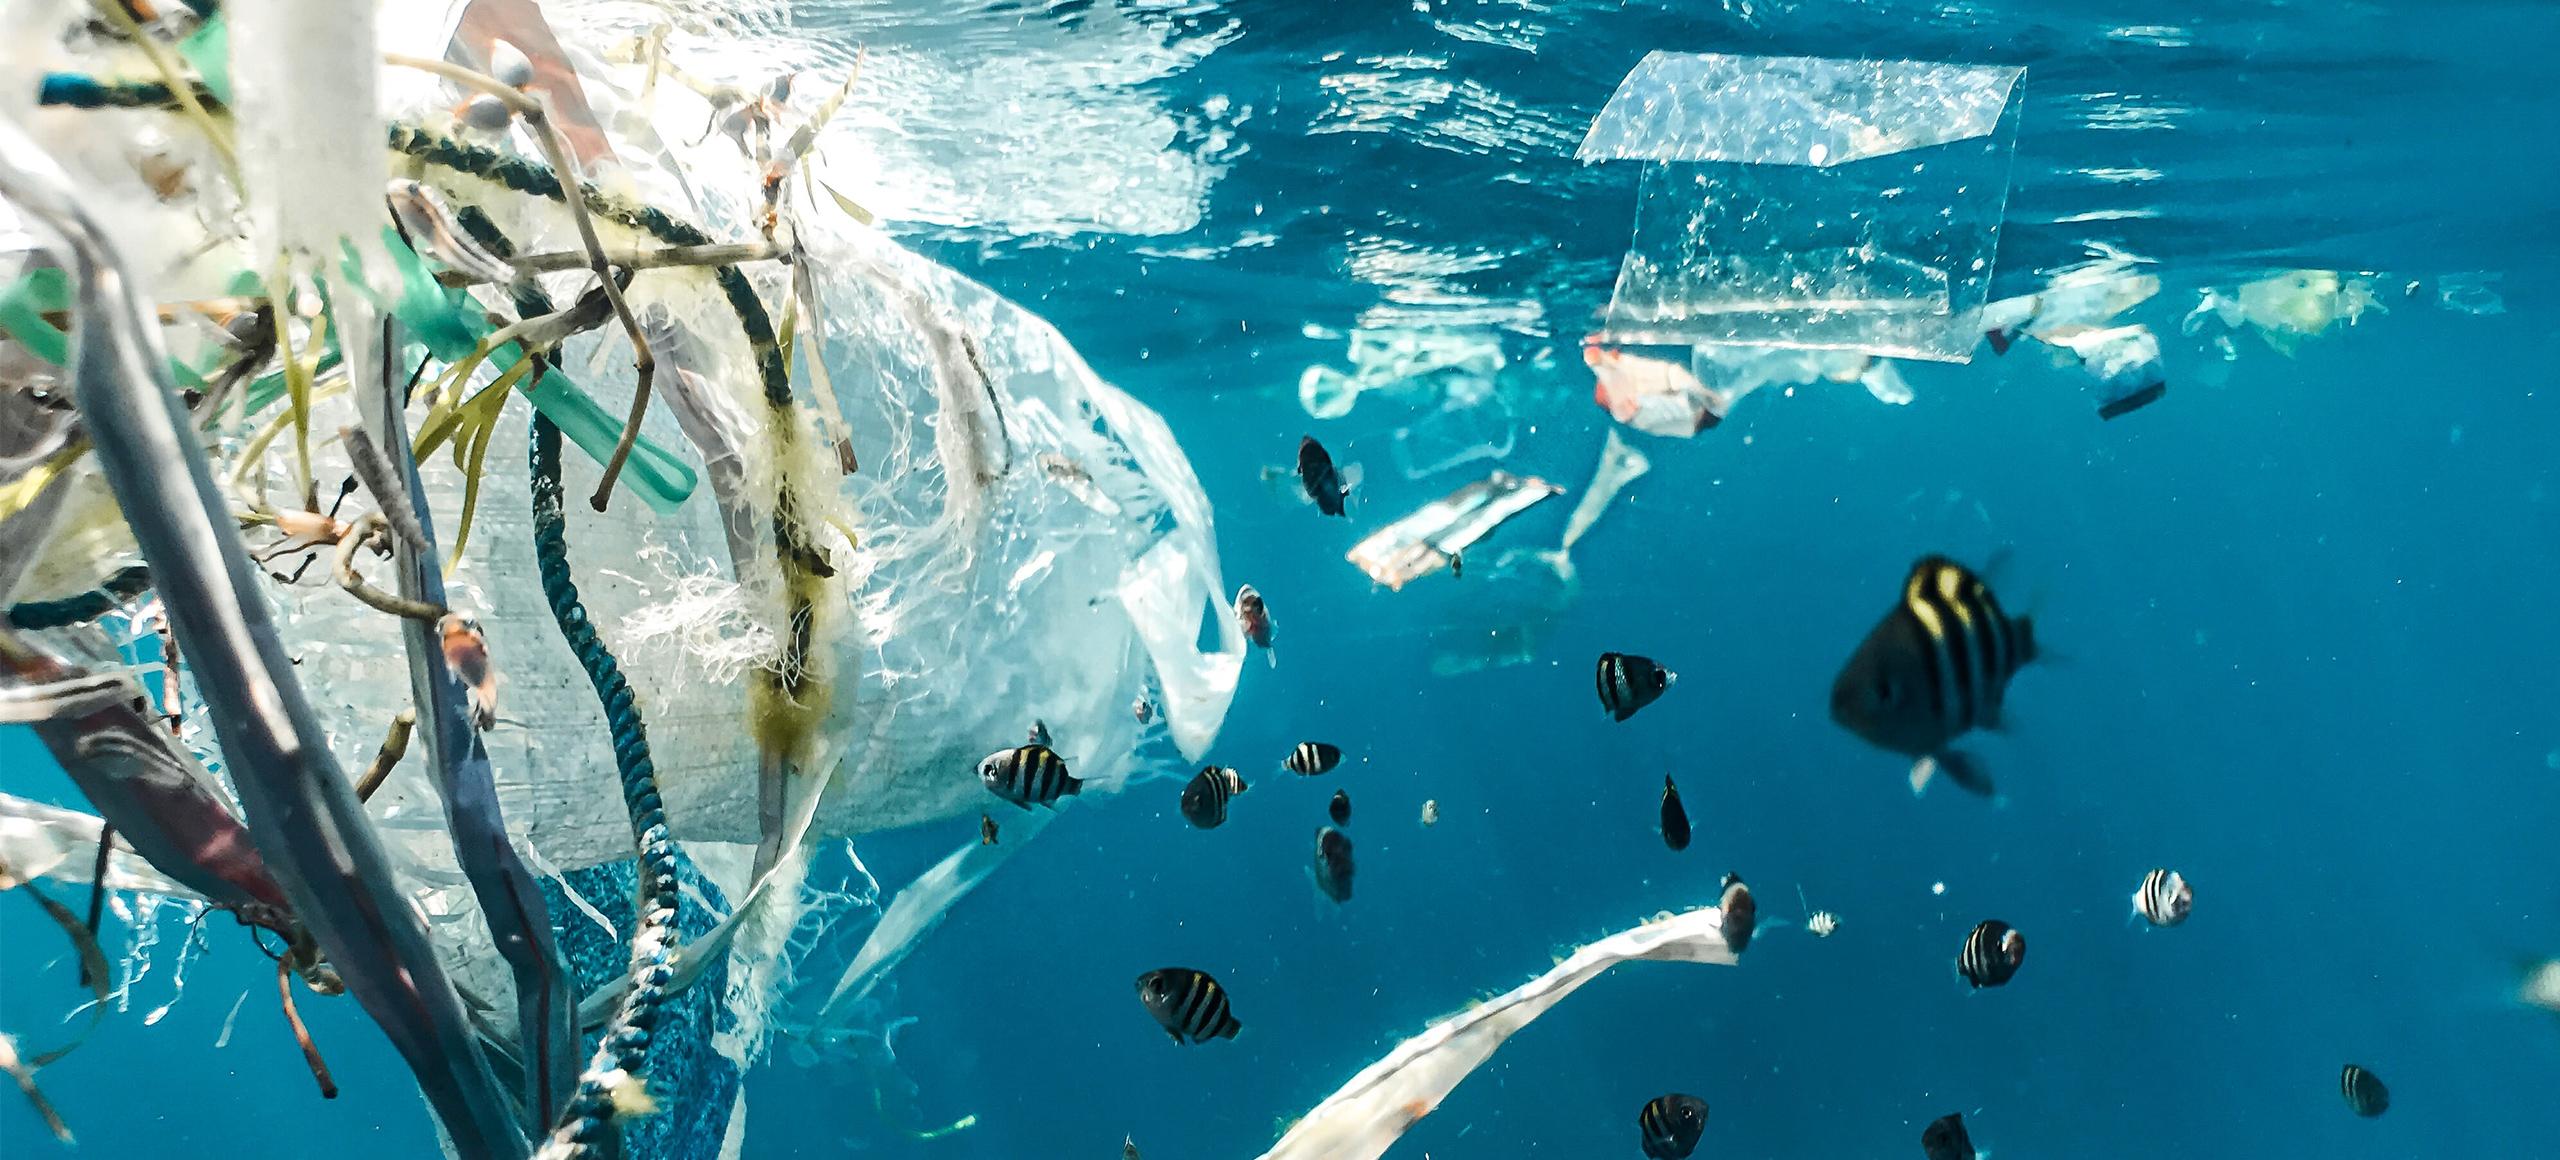 Plastic bag in the ocean with fish.